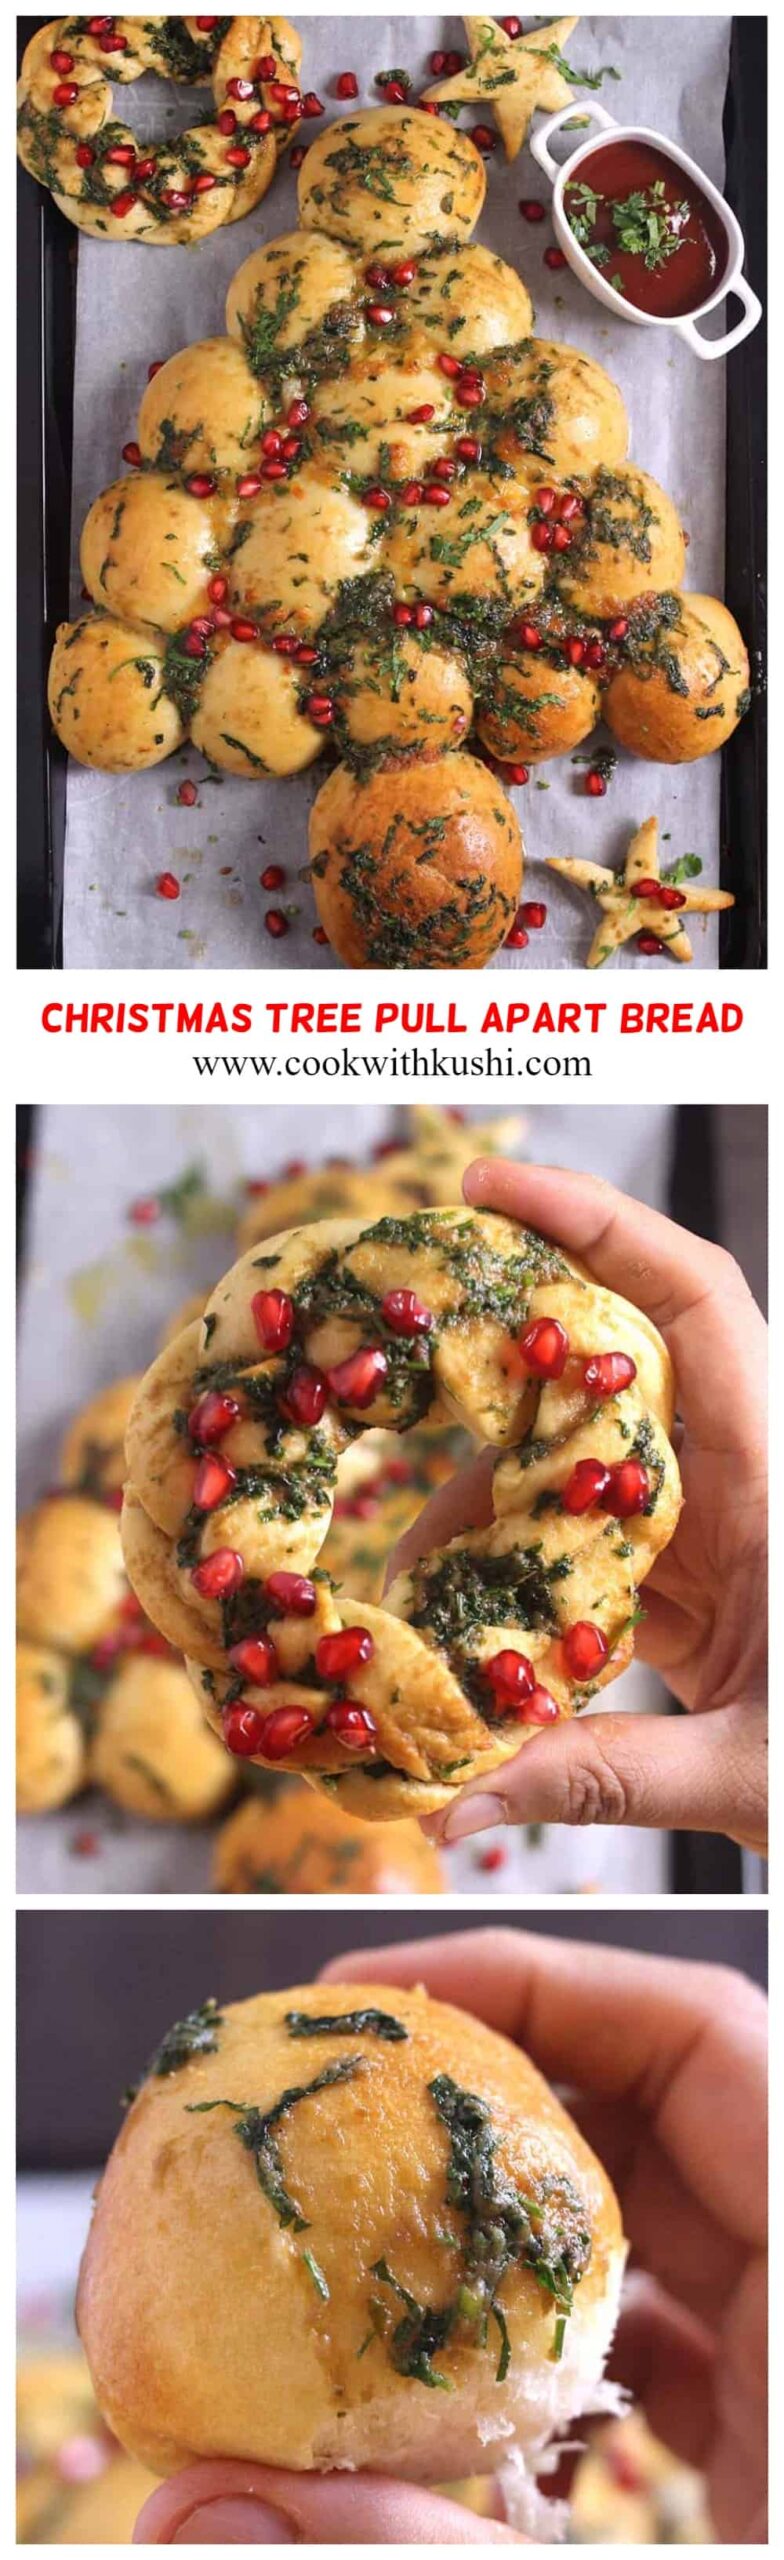 how to make christmas tree pull apart bread for holiday dinner table #sides #sidedish #appetizer